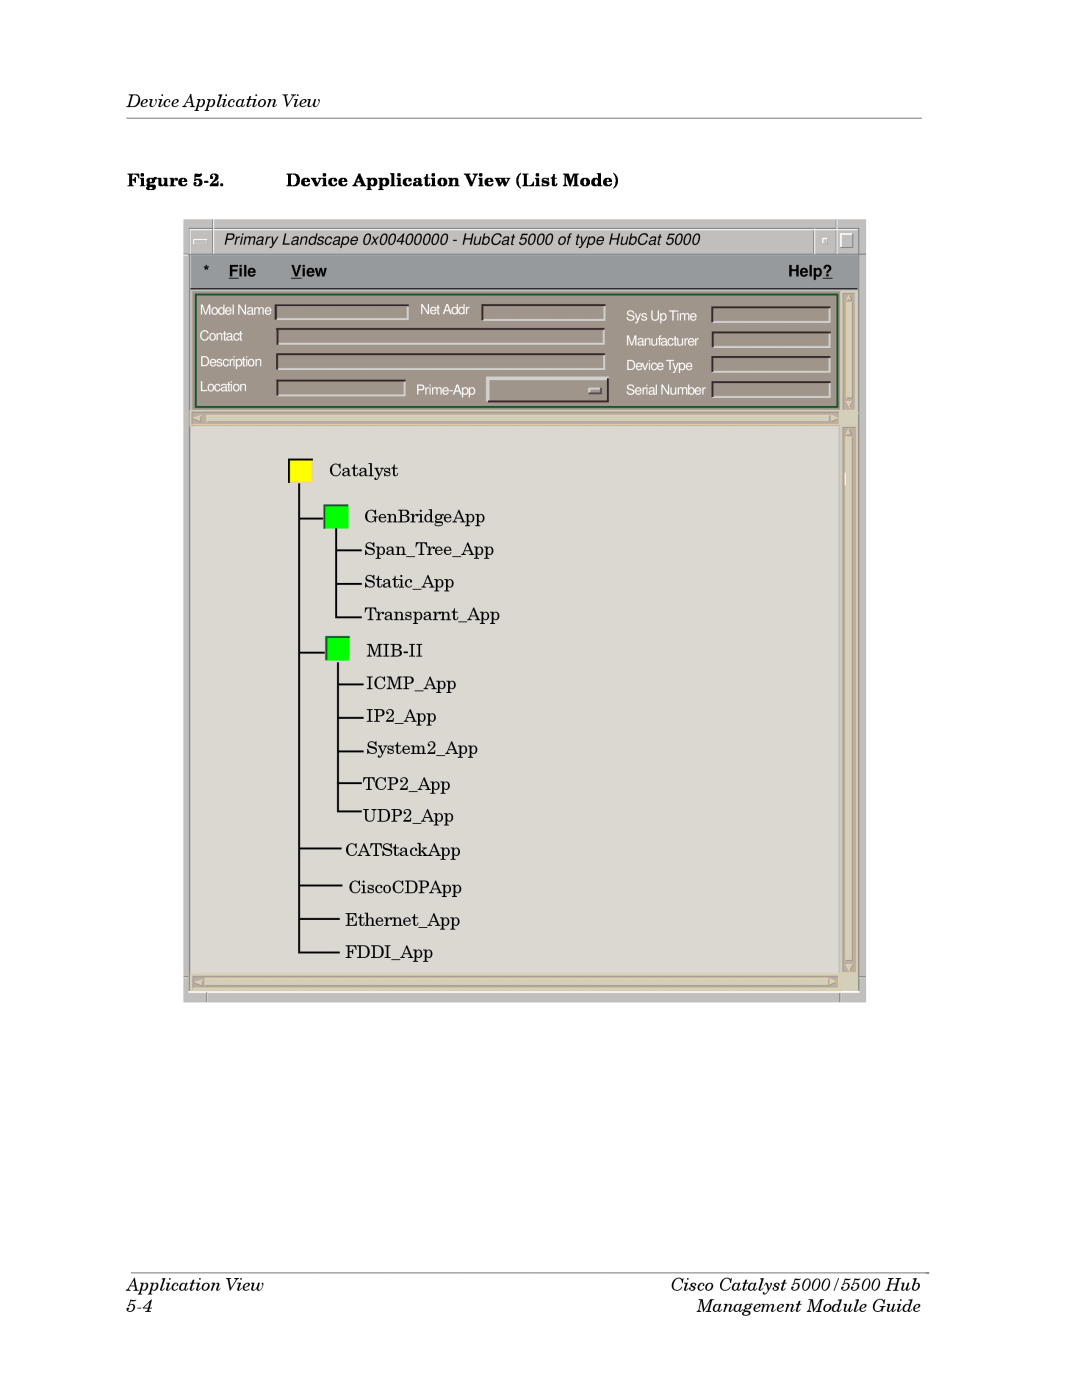 Cabletron Systems 2. Device Application View List Mode, Cisco Catalyst 5000/5500 Hub, Management Module Guide, File 